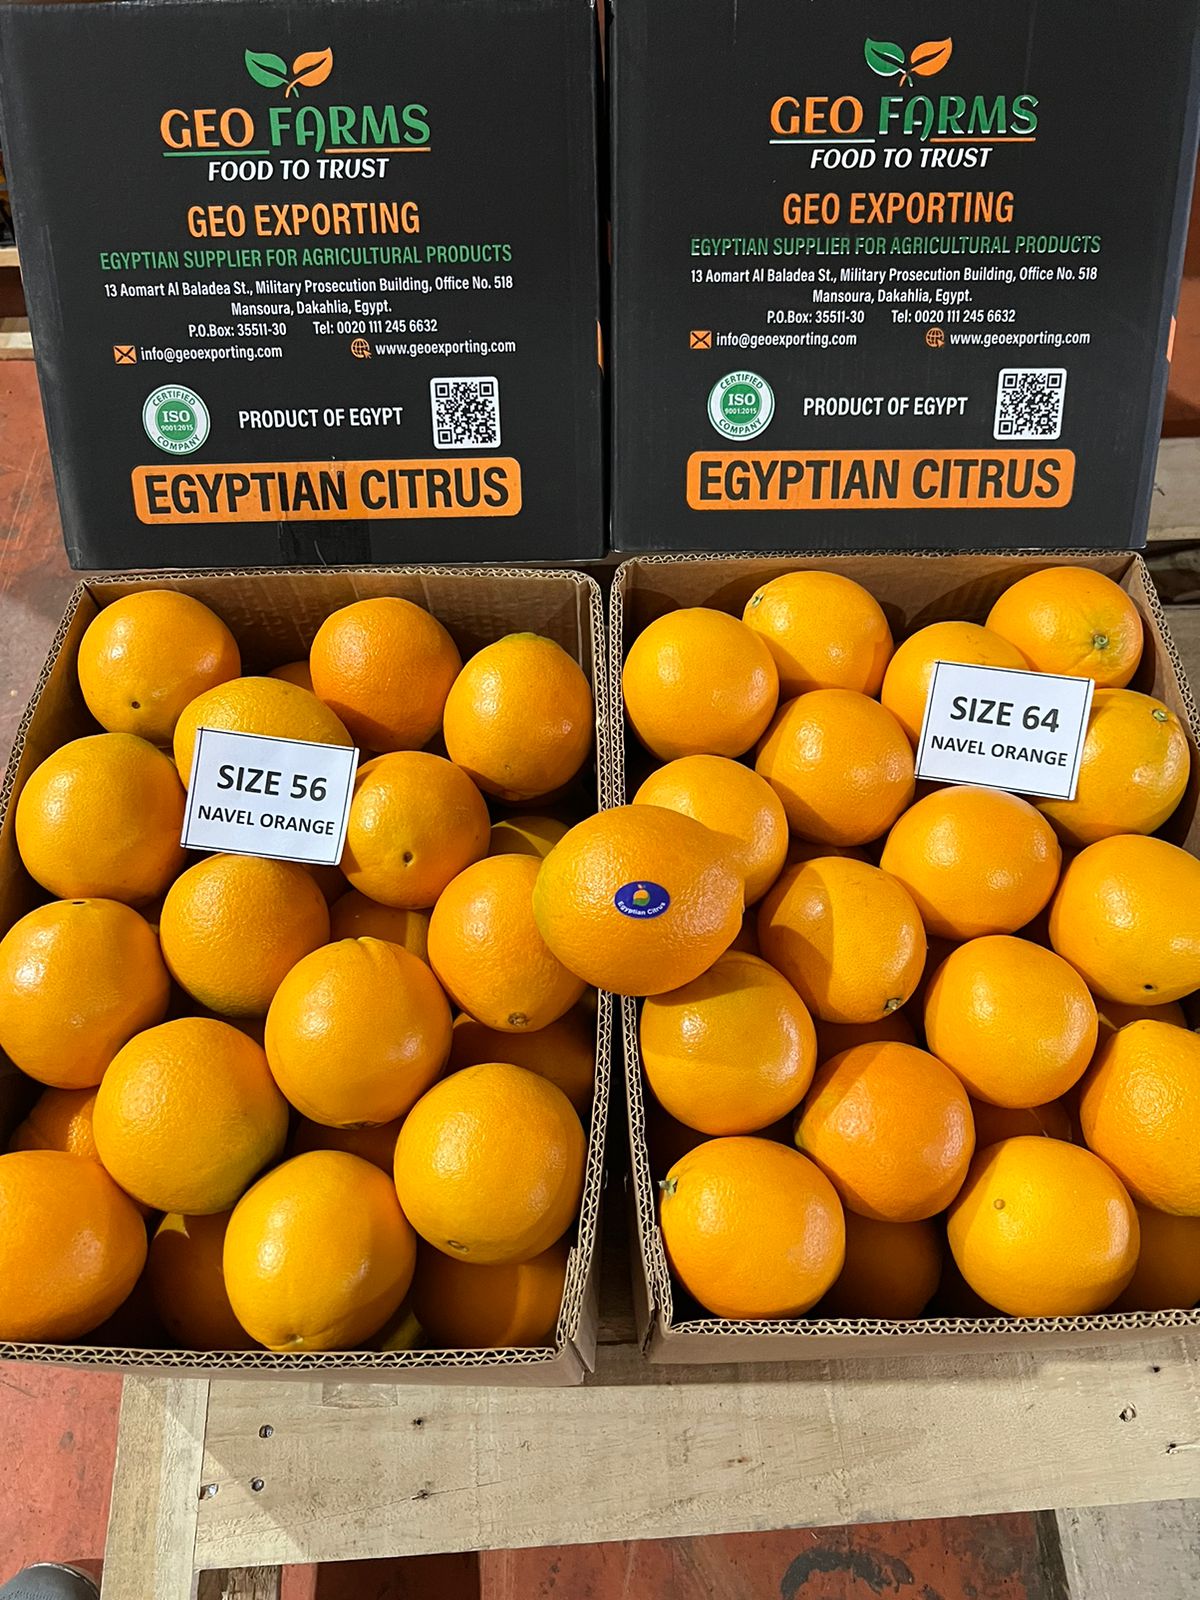 Egypain Navel oranges by geo exporting